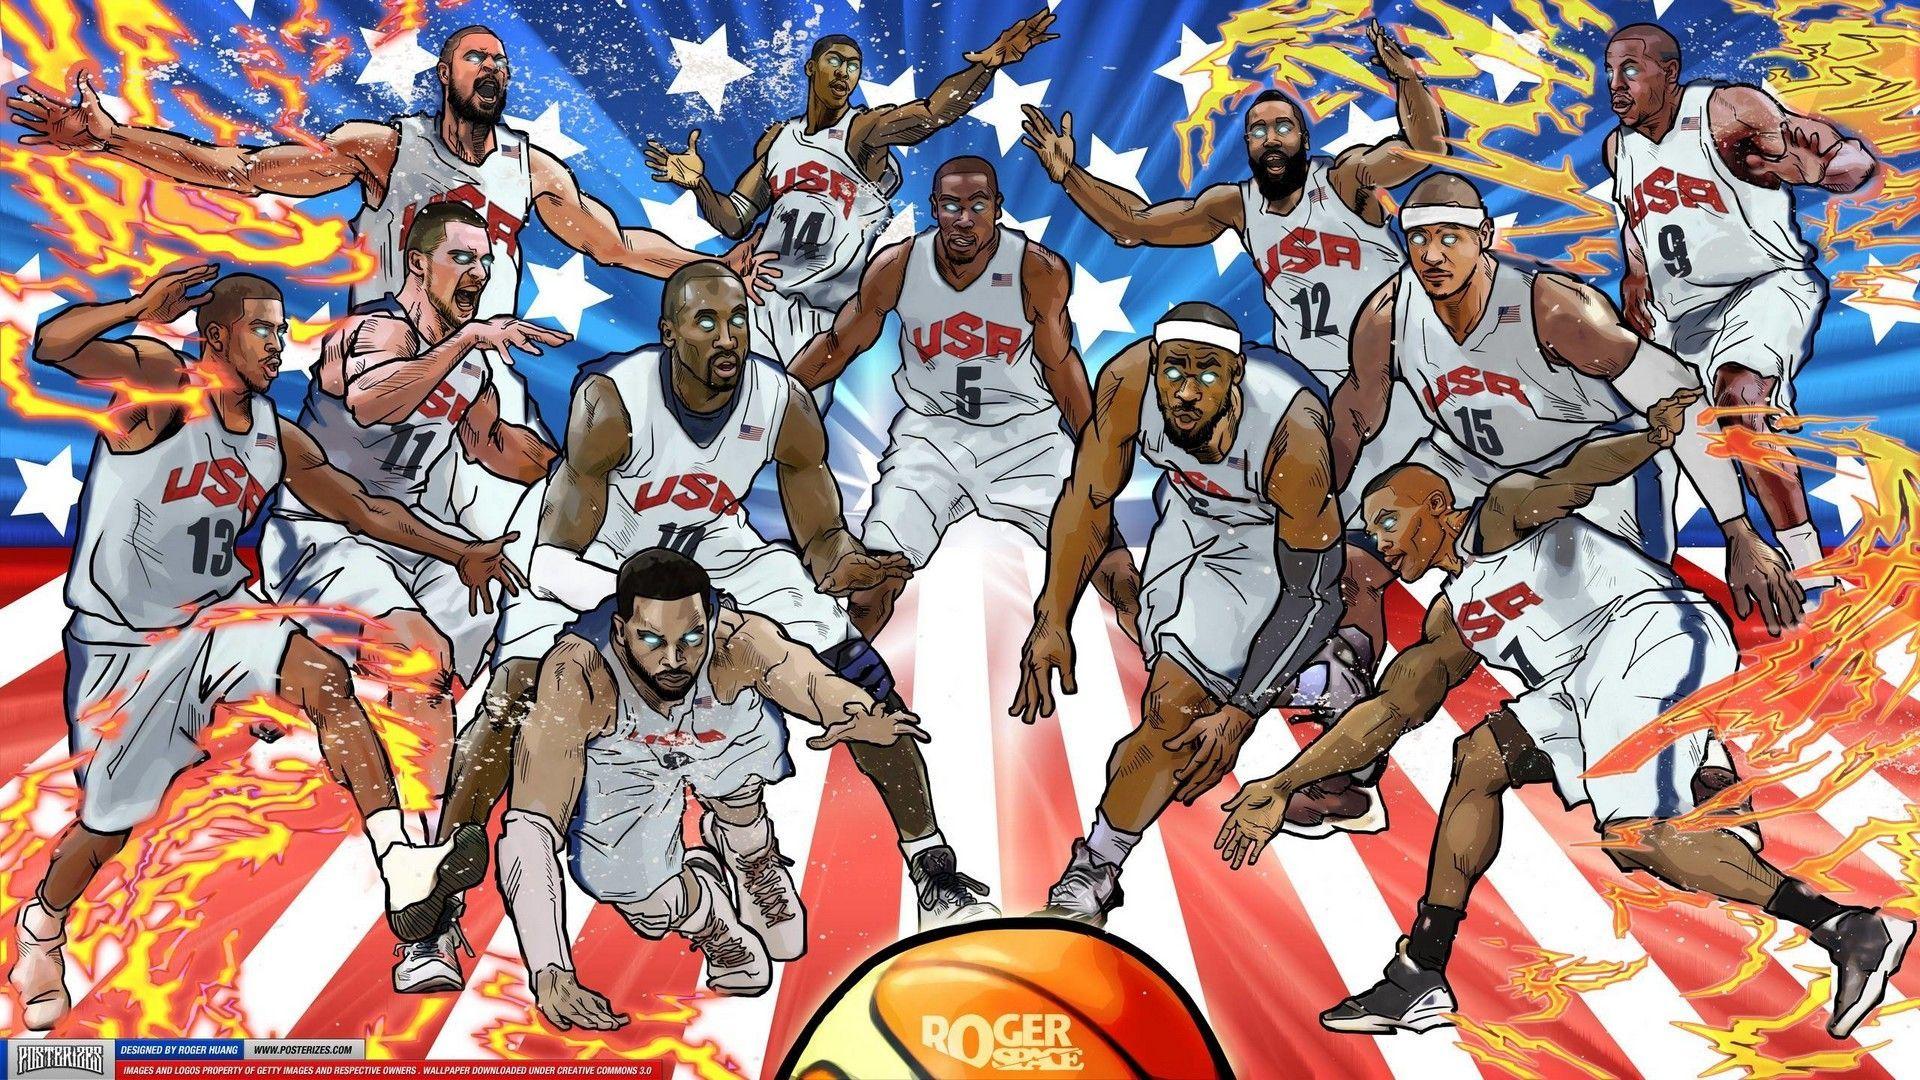 Hand Painted Cartoon Basketball Ball Game Poster Background Material  Wallpaper Image For Free Download  Pngtree